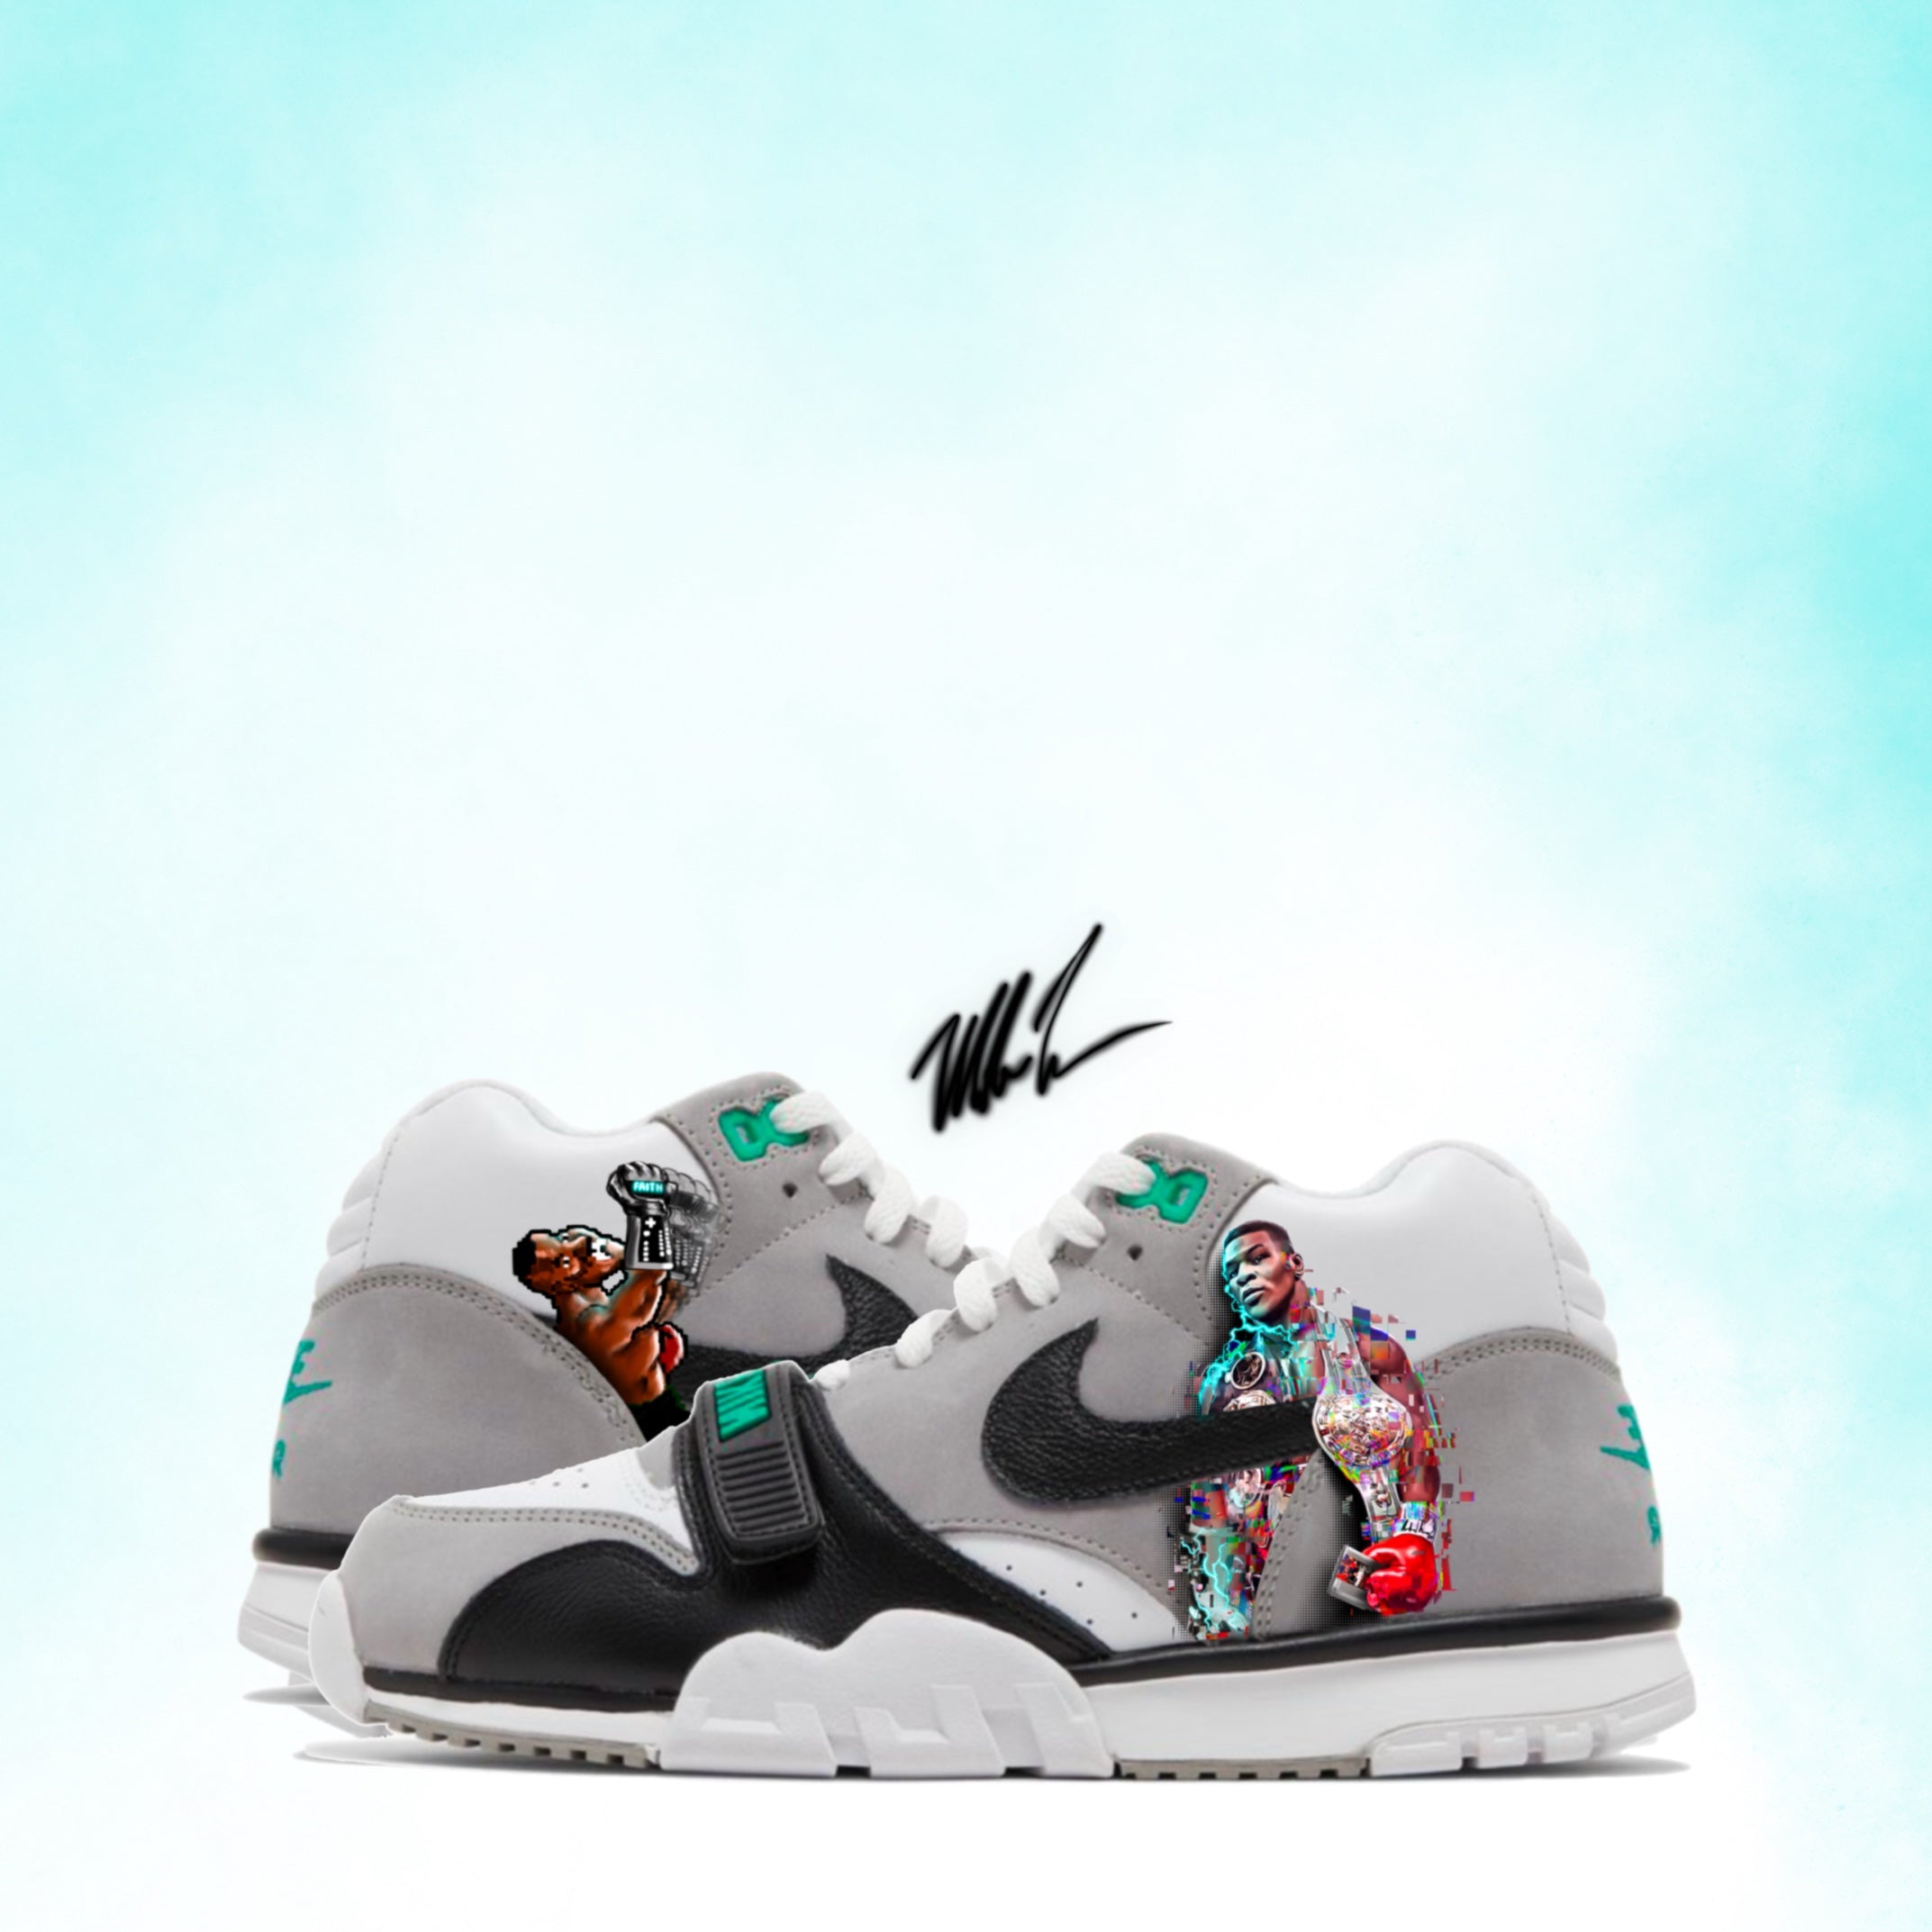 Nike Air Trainer "Kid Dynamite" Limited Edition of 144